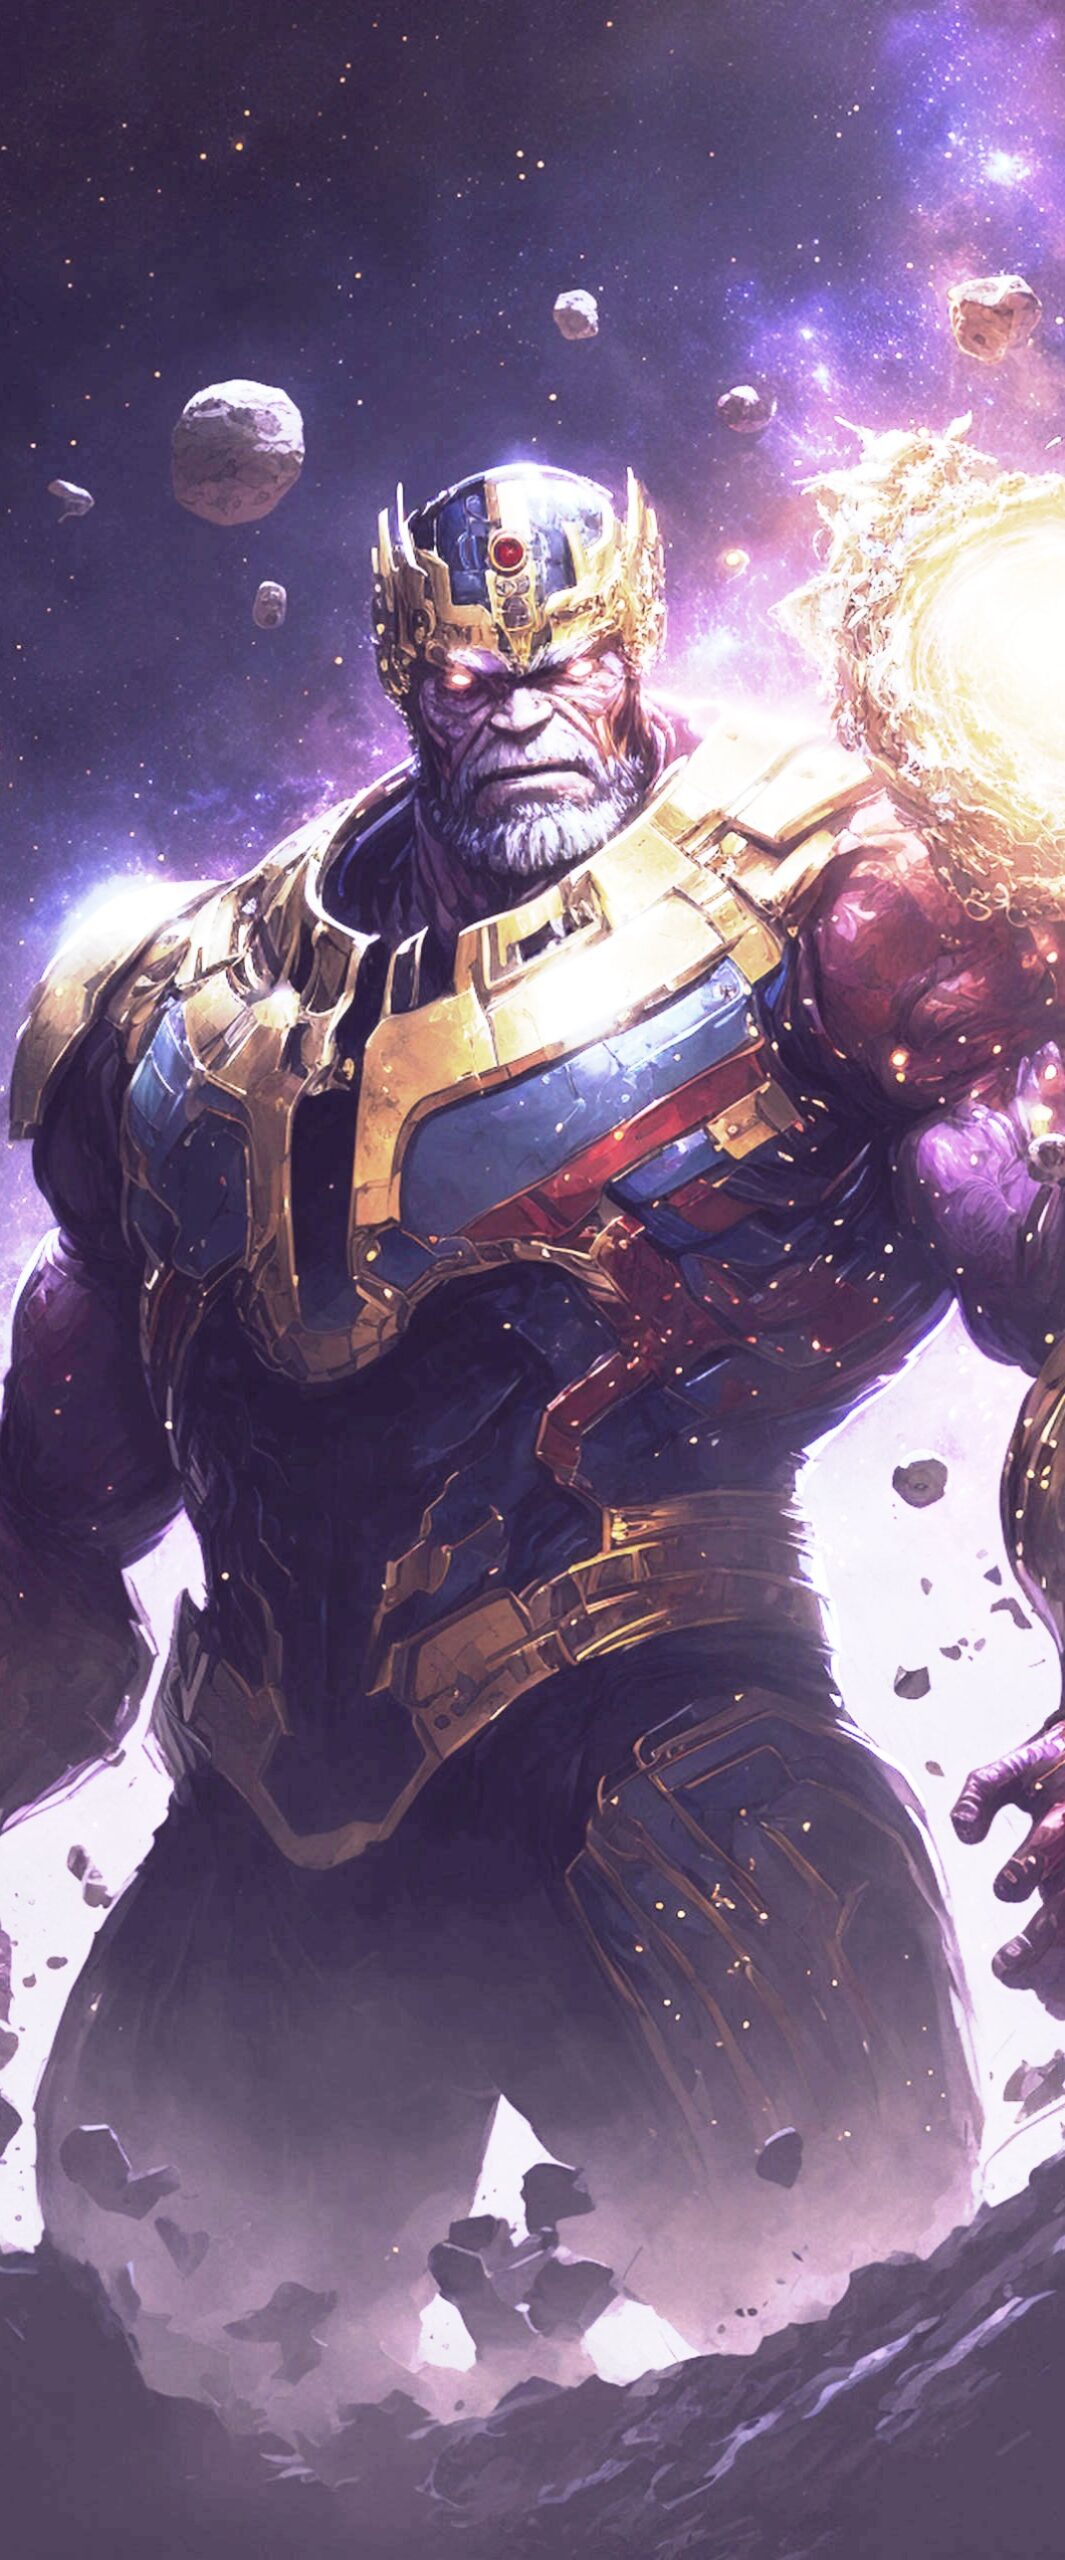 Thanos Wallpaper 4k For iPhone